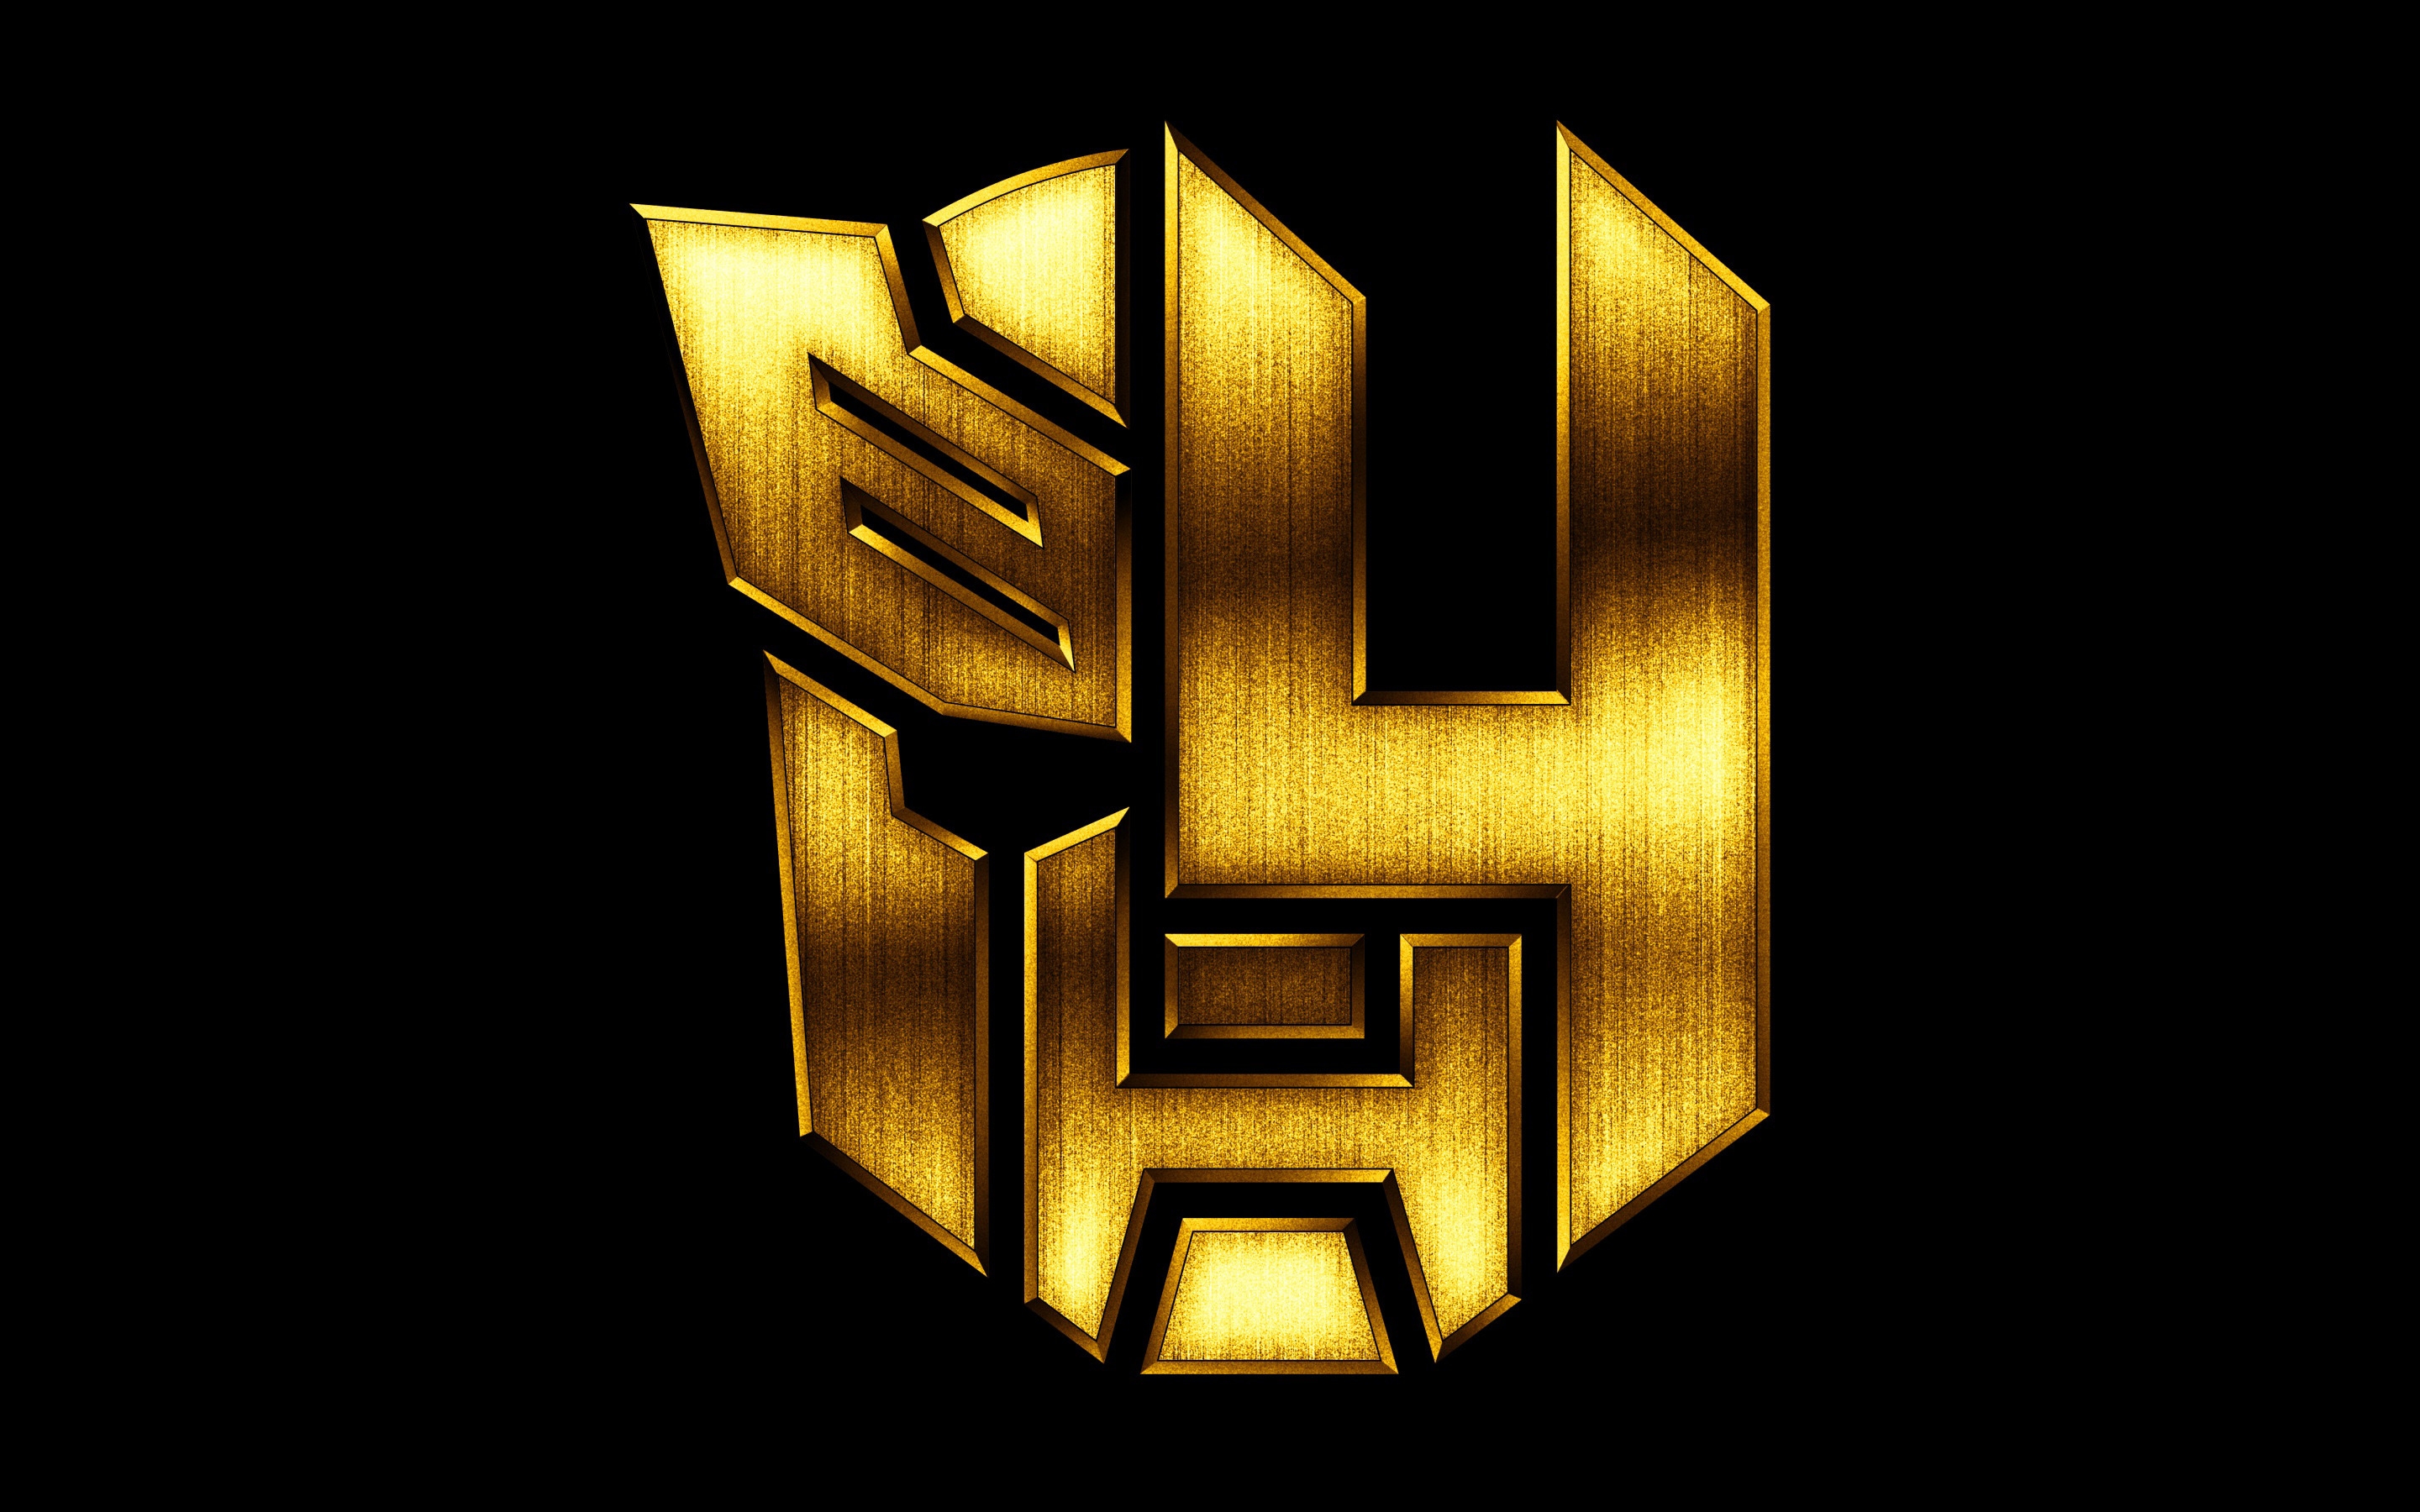 Transformers 4 Age of Extinction 2014 for 2880 x 1800 Retina Display resolution